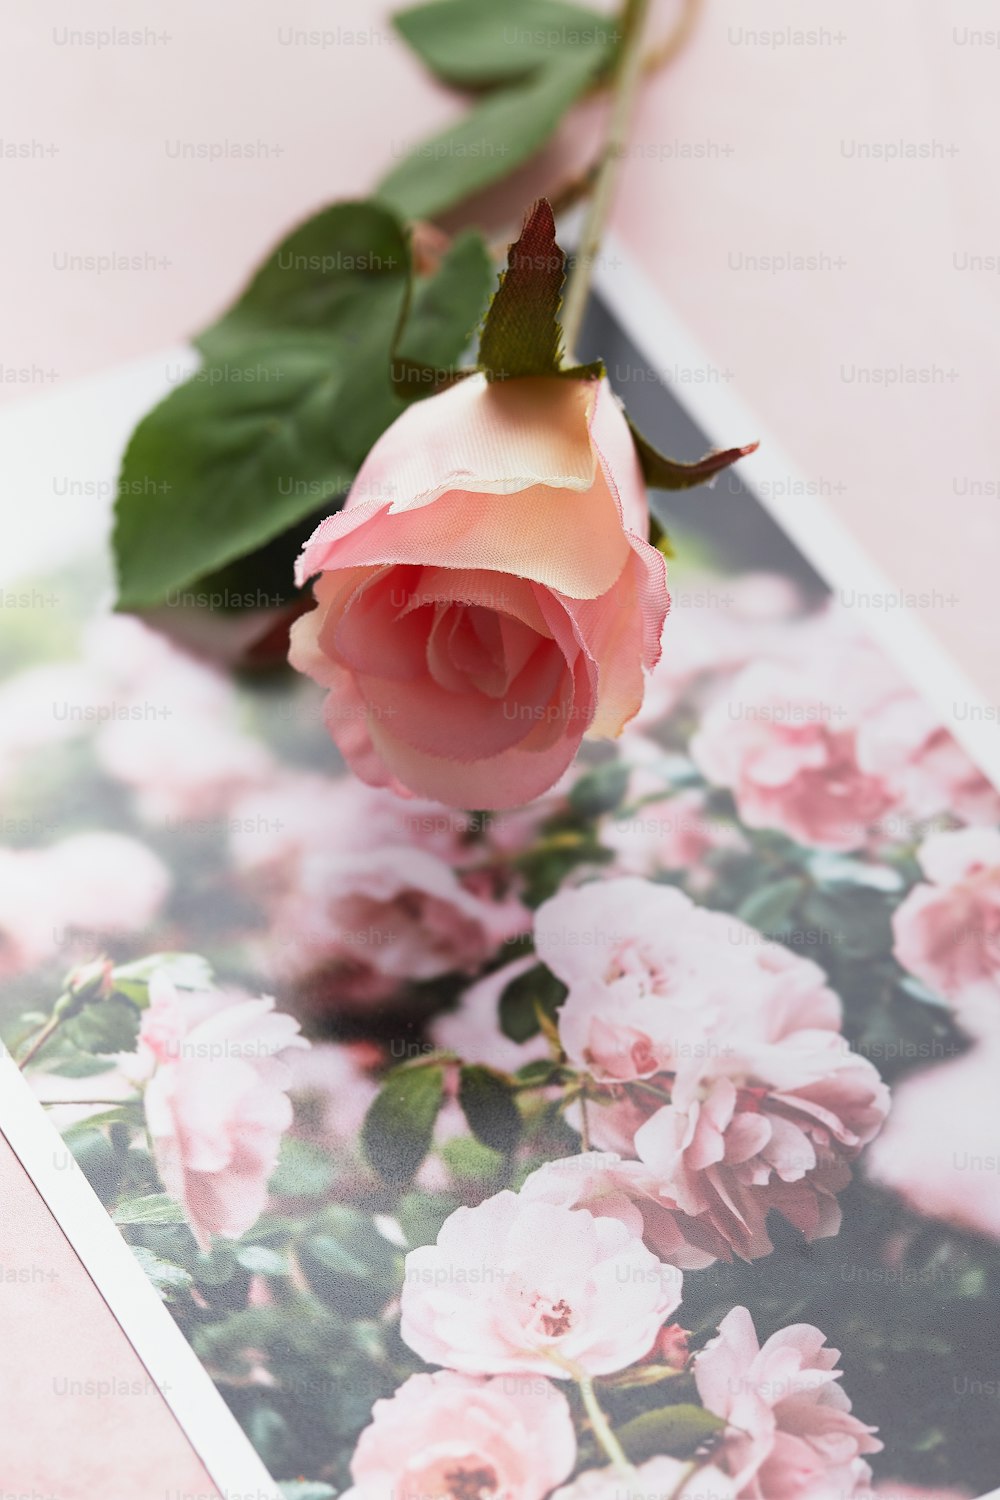 100+ Pink Rose Pictures [HD]  Download Free Images & Stock Photos on  Unsplash